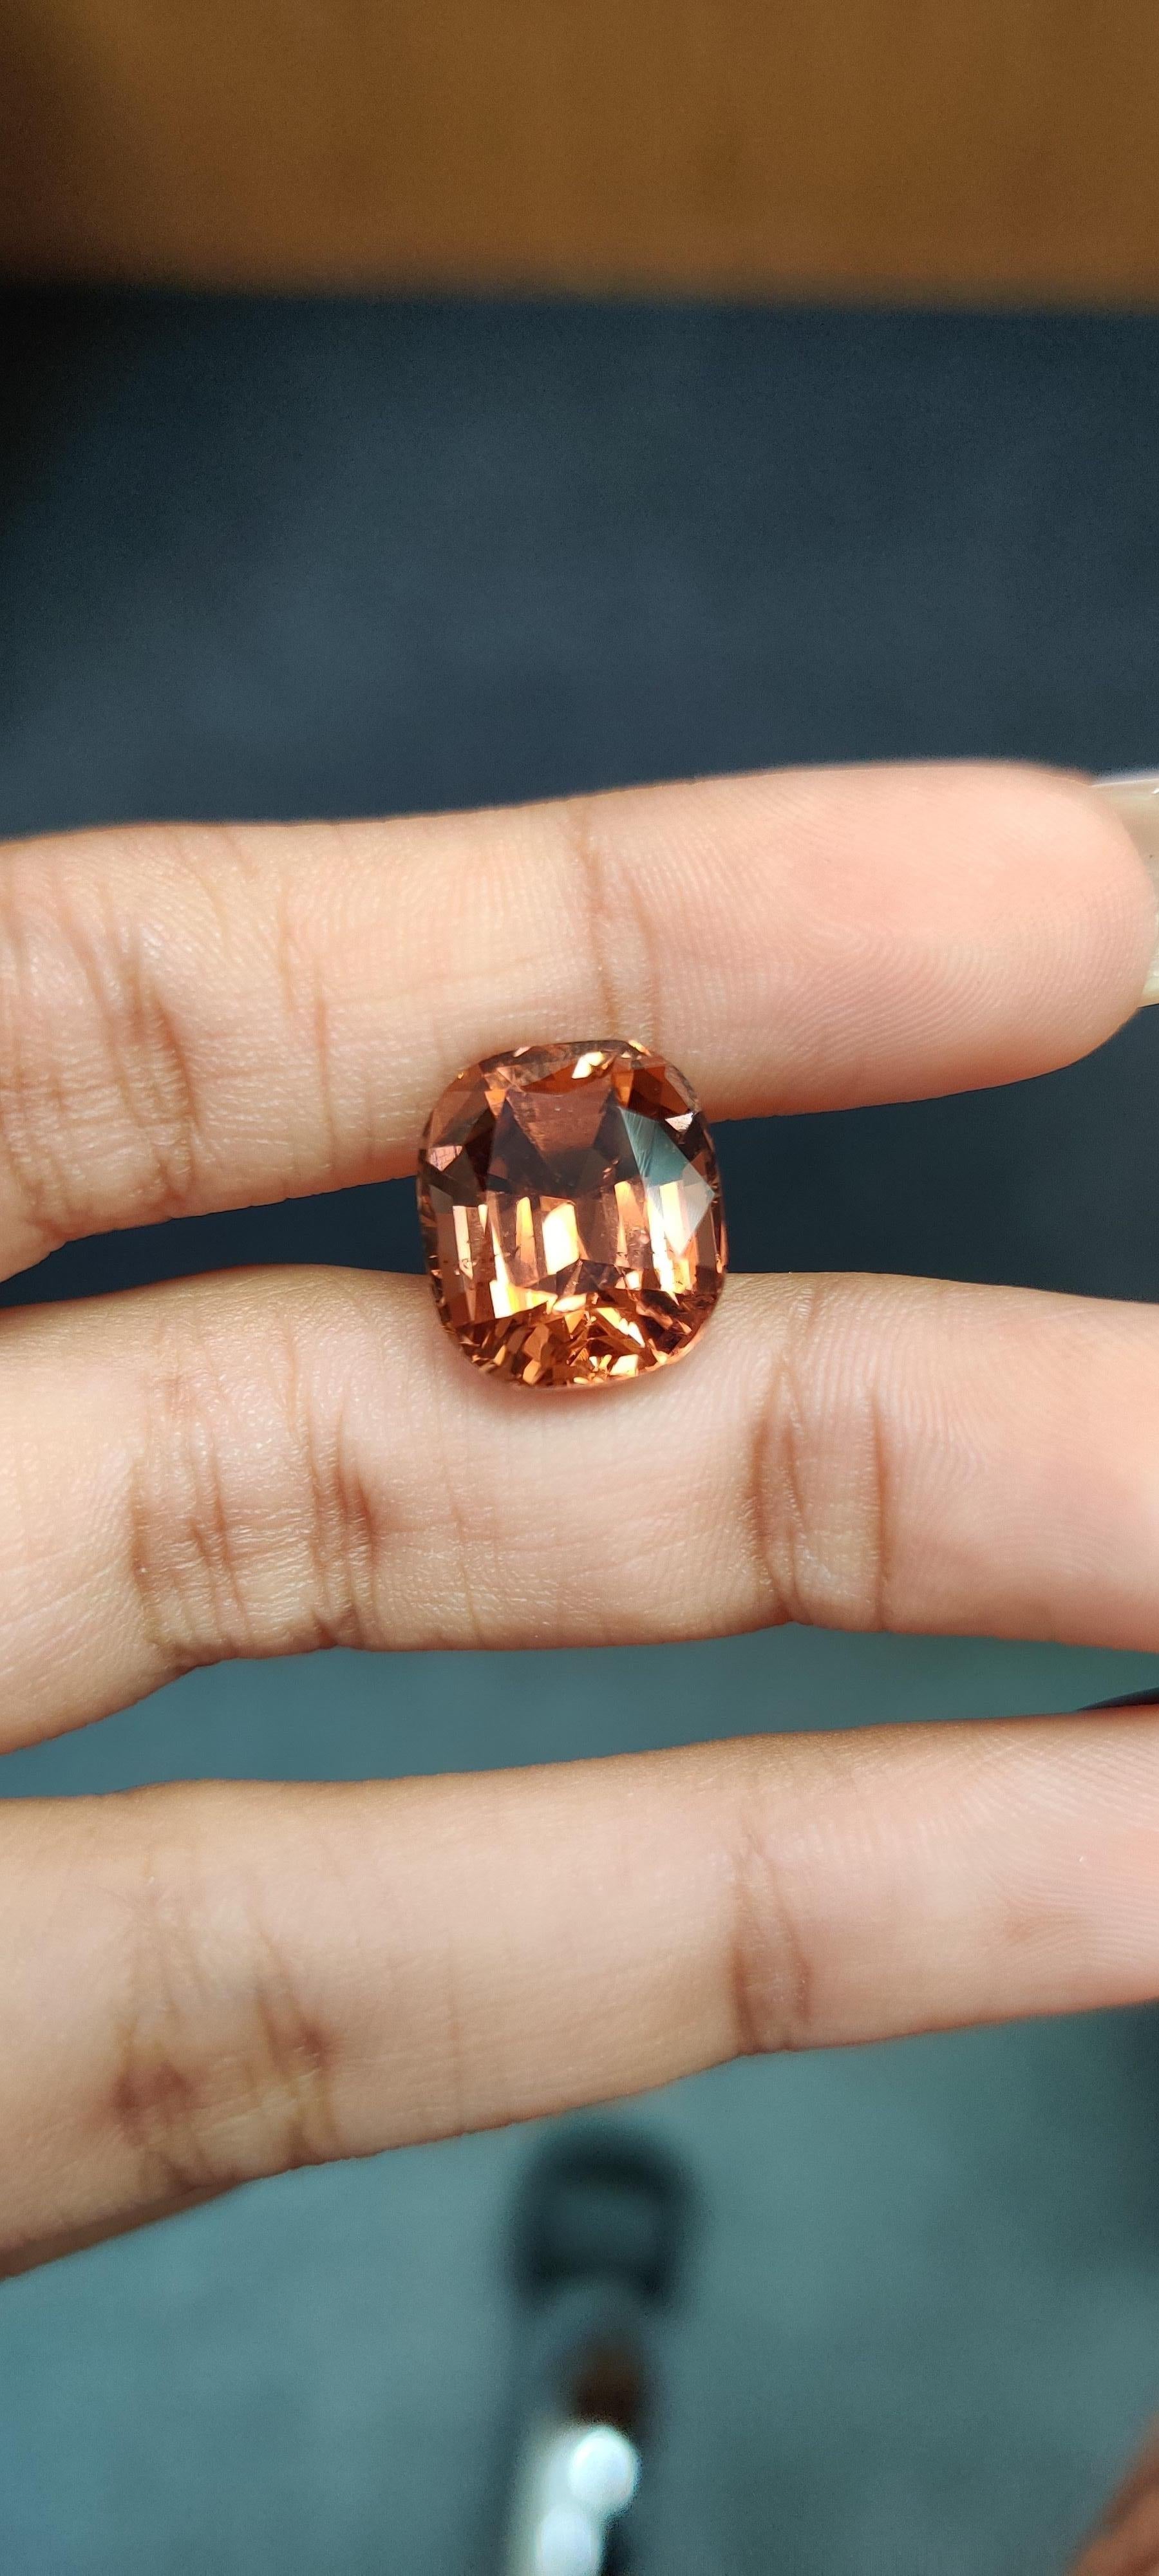 A massive, mesmerizing 9.71 Carat Tourmaline stone that is a gorgeous shade of orange. It is completely natural and of good quality. The tourmaline piece is cut into perfection in a cushion-cut shape.

The orange tourmaline has not undergone any